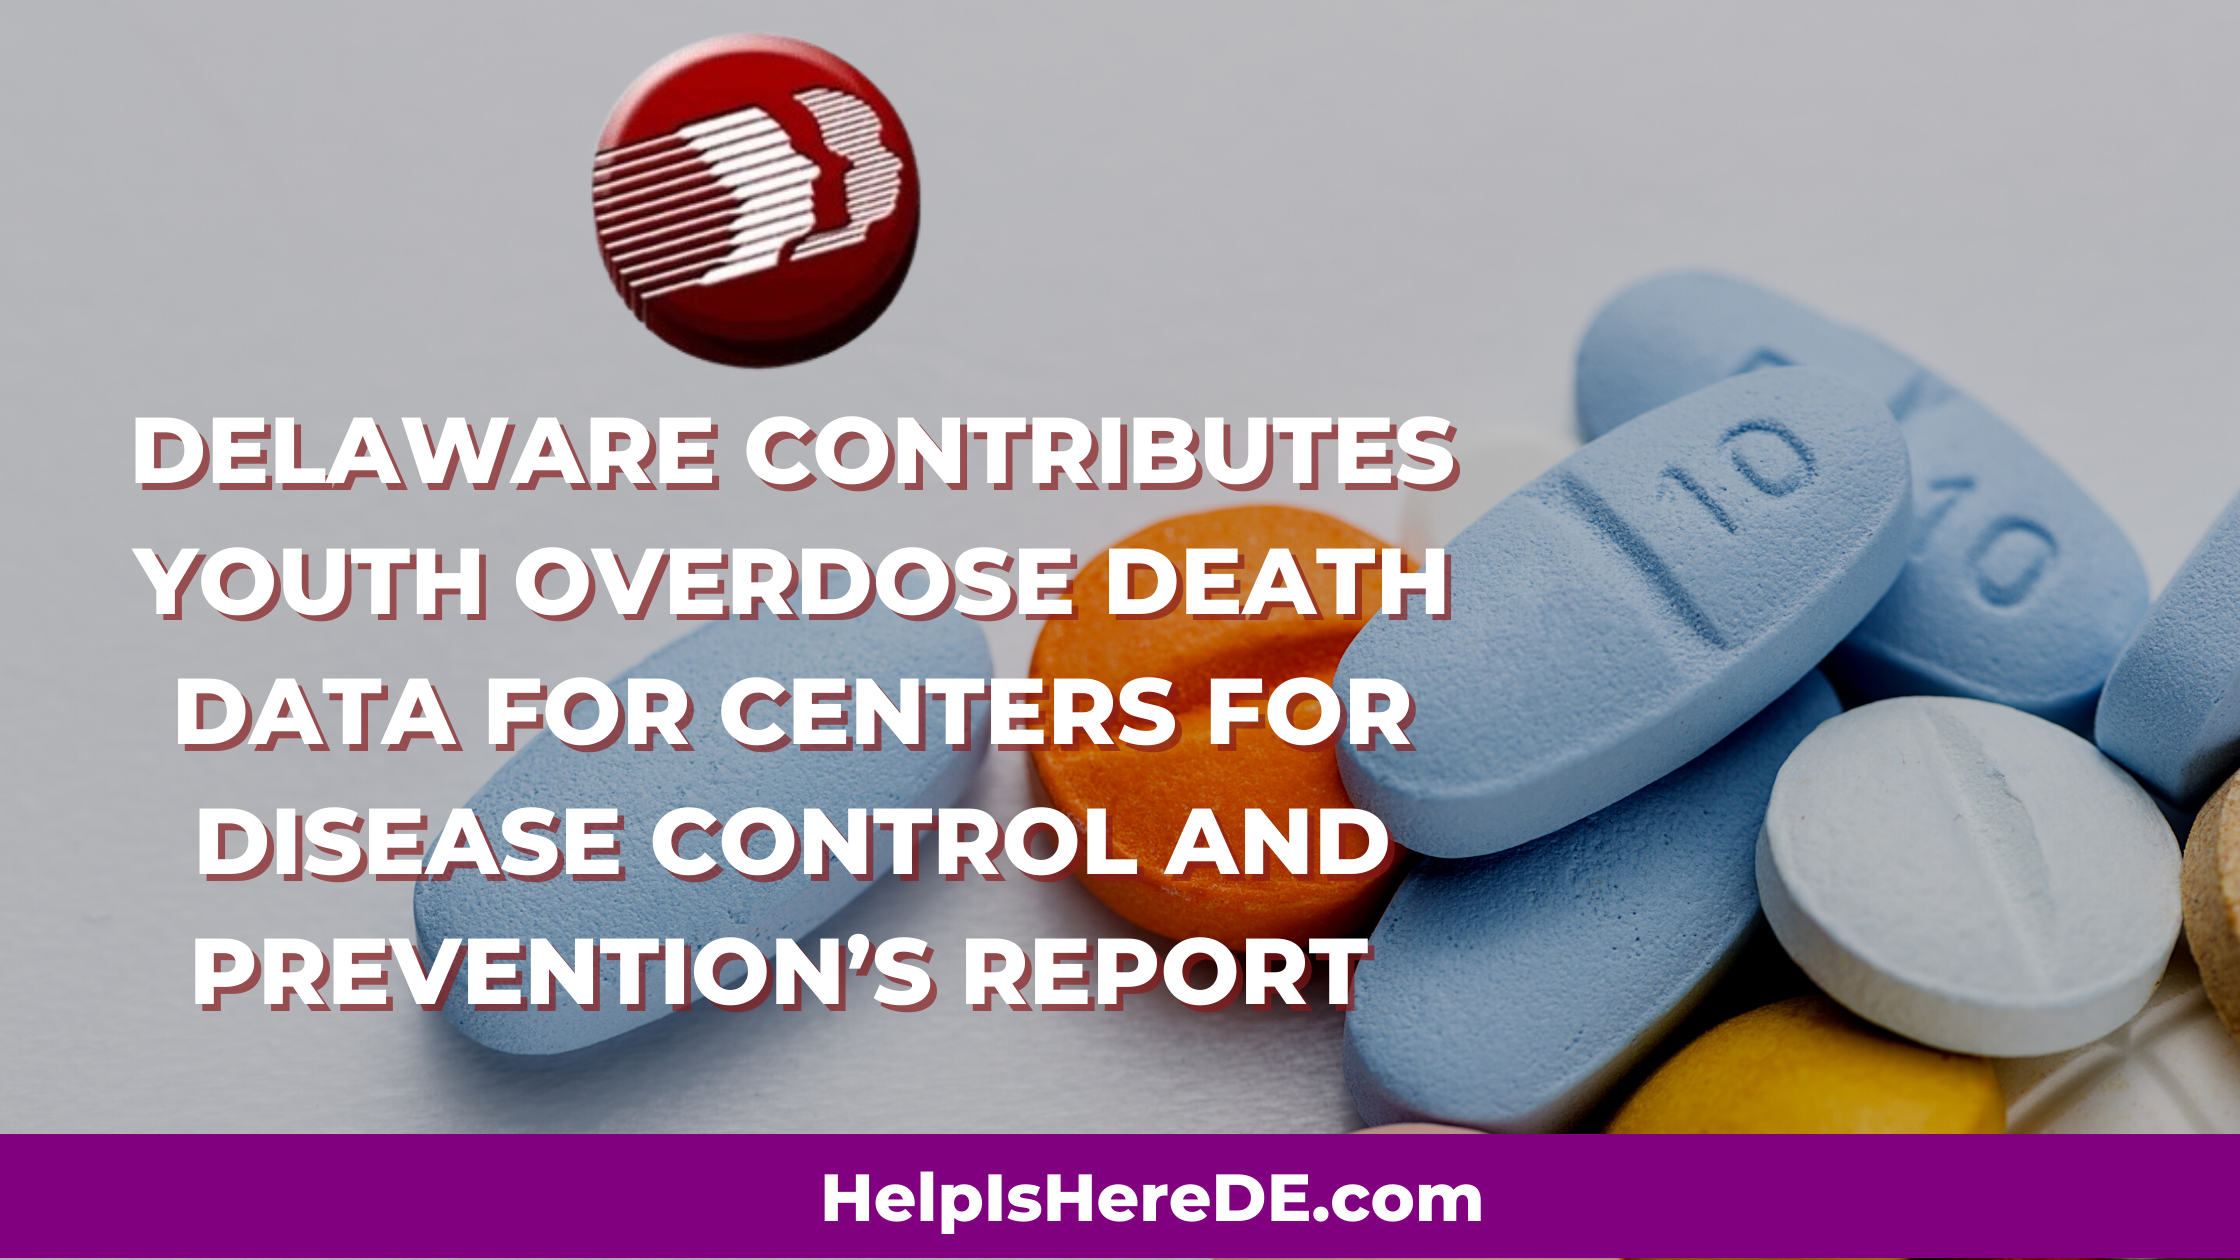 Delaware Contributes Youth Overdose Death Data for Centers for Disease Control and Prevention’s Report